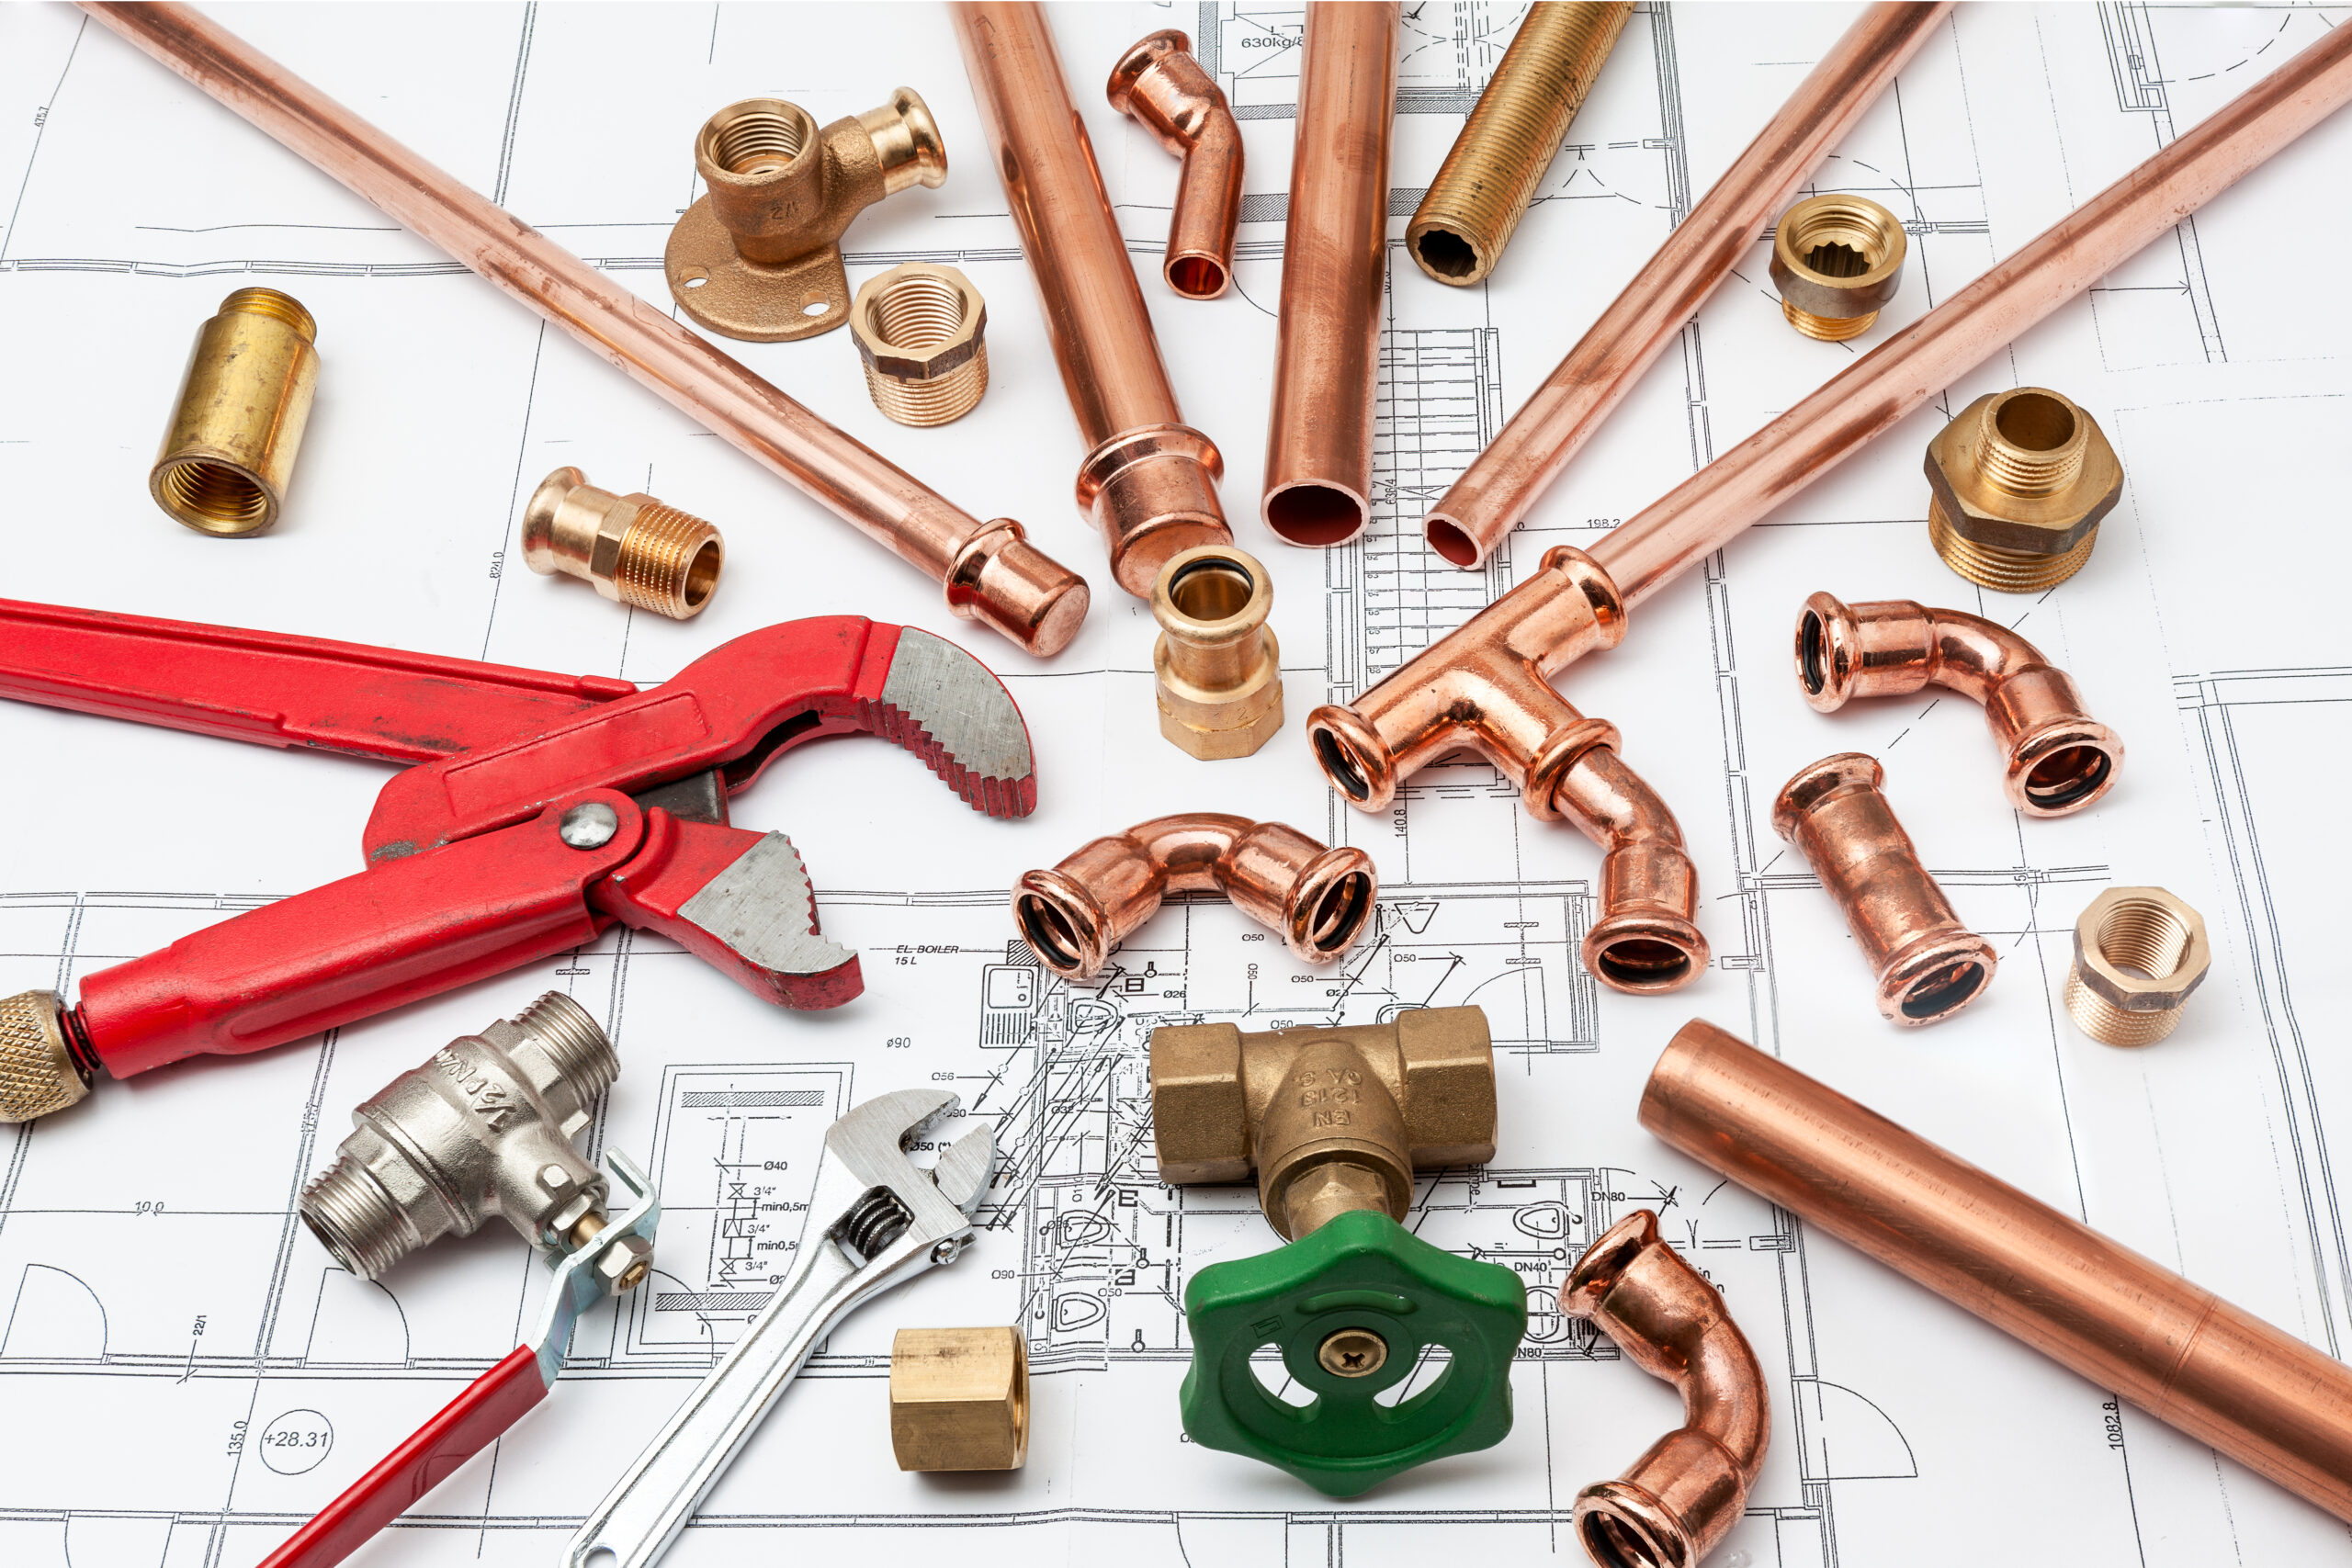 Plumbing tools and pipes arranged on house plans